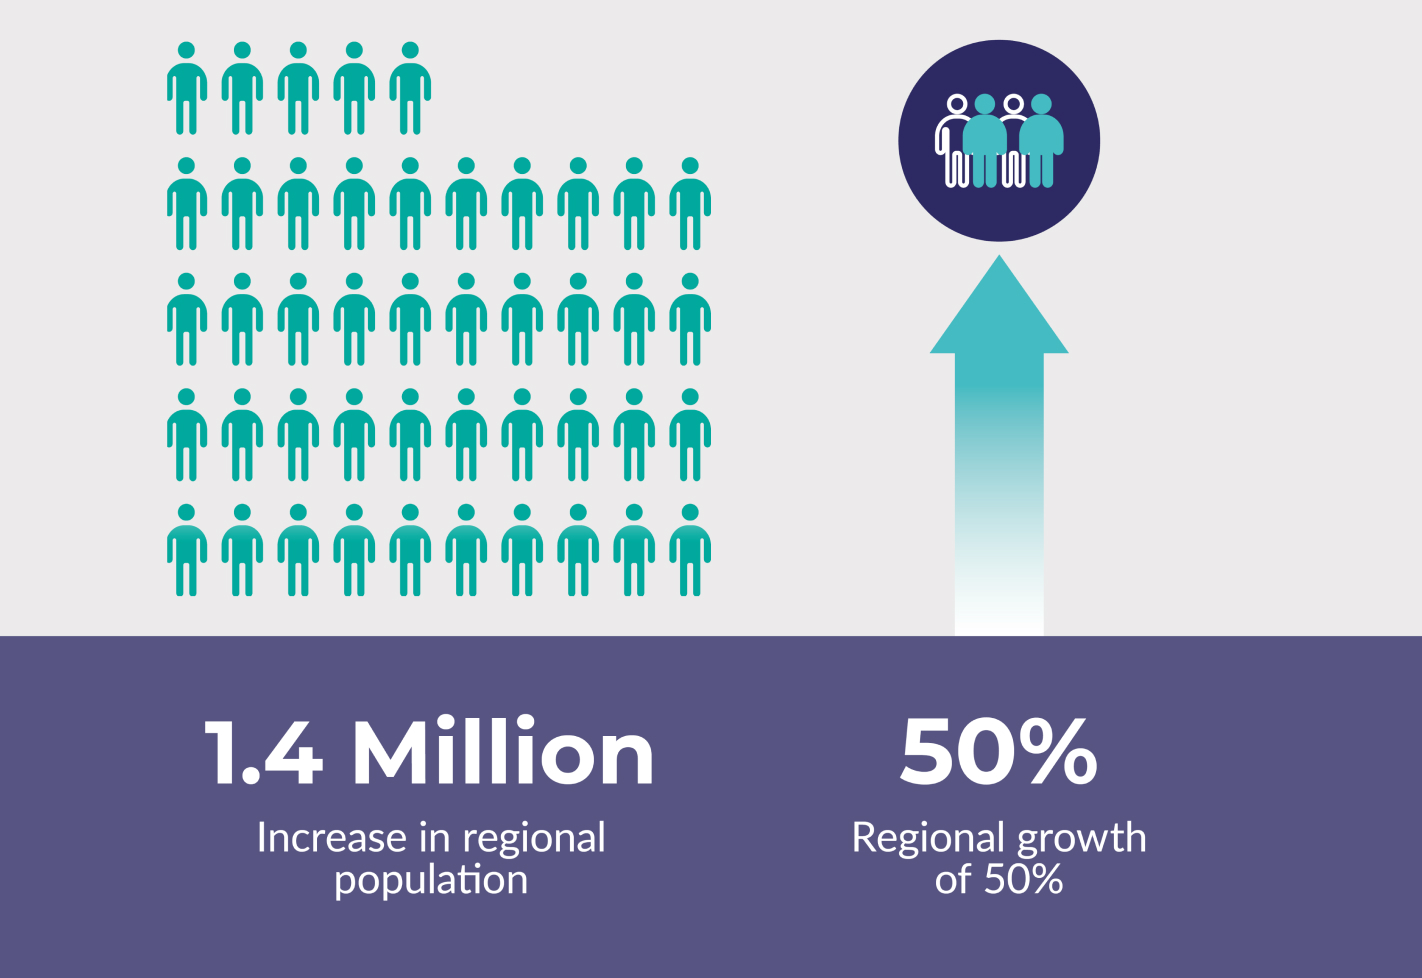 1.4 million increase in regional population, which is 50% growth